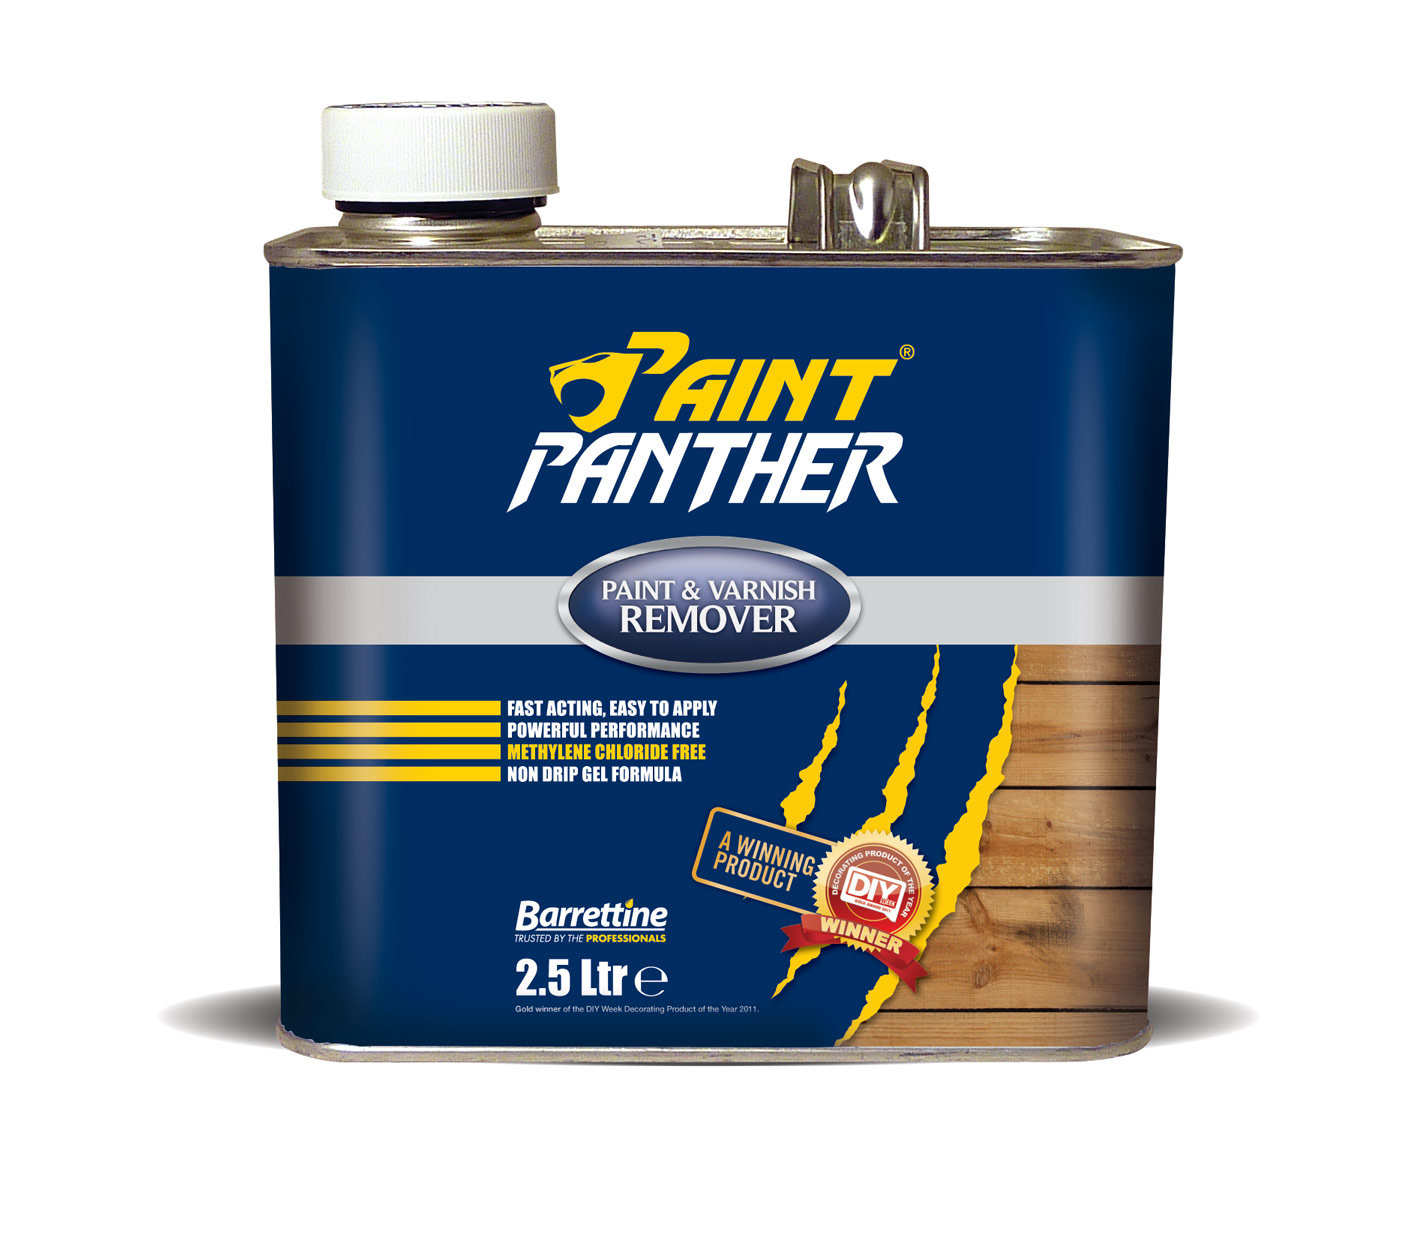 Applied power. Paints and Varnishes. Liberon fws500 Wood stripper. Fast Remover. Barrettine products.